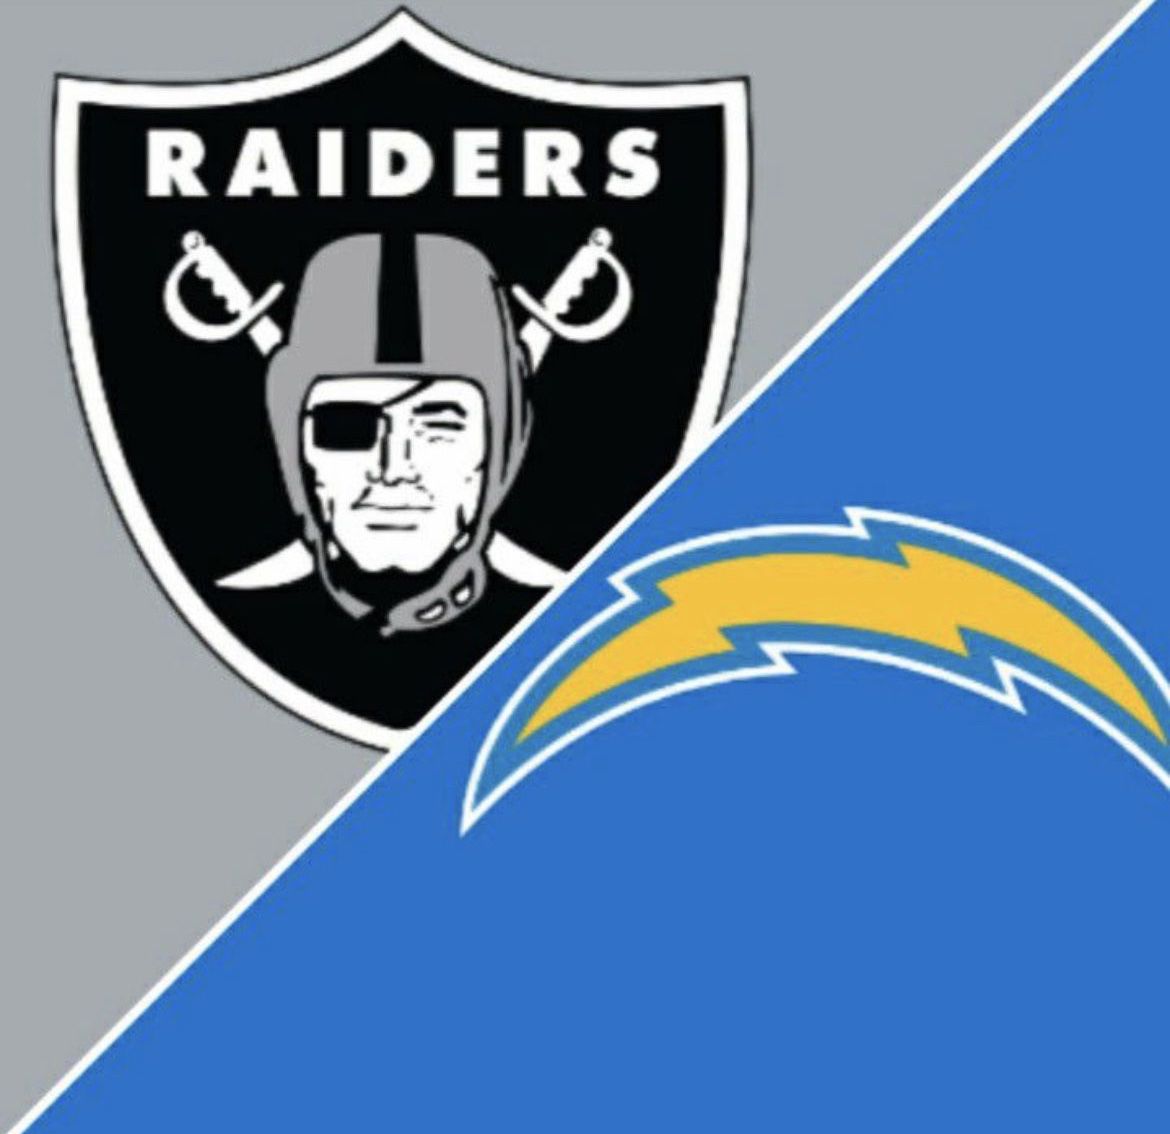 raiders vs chargers tickets